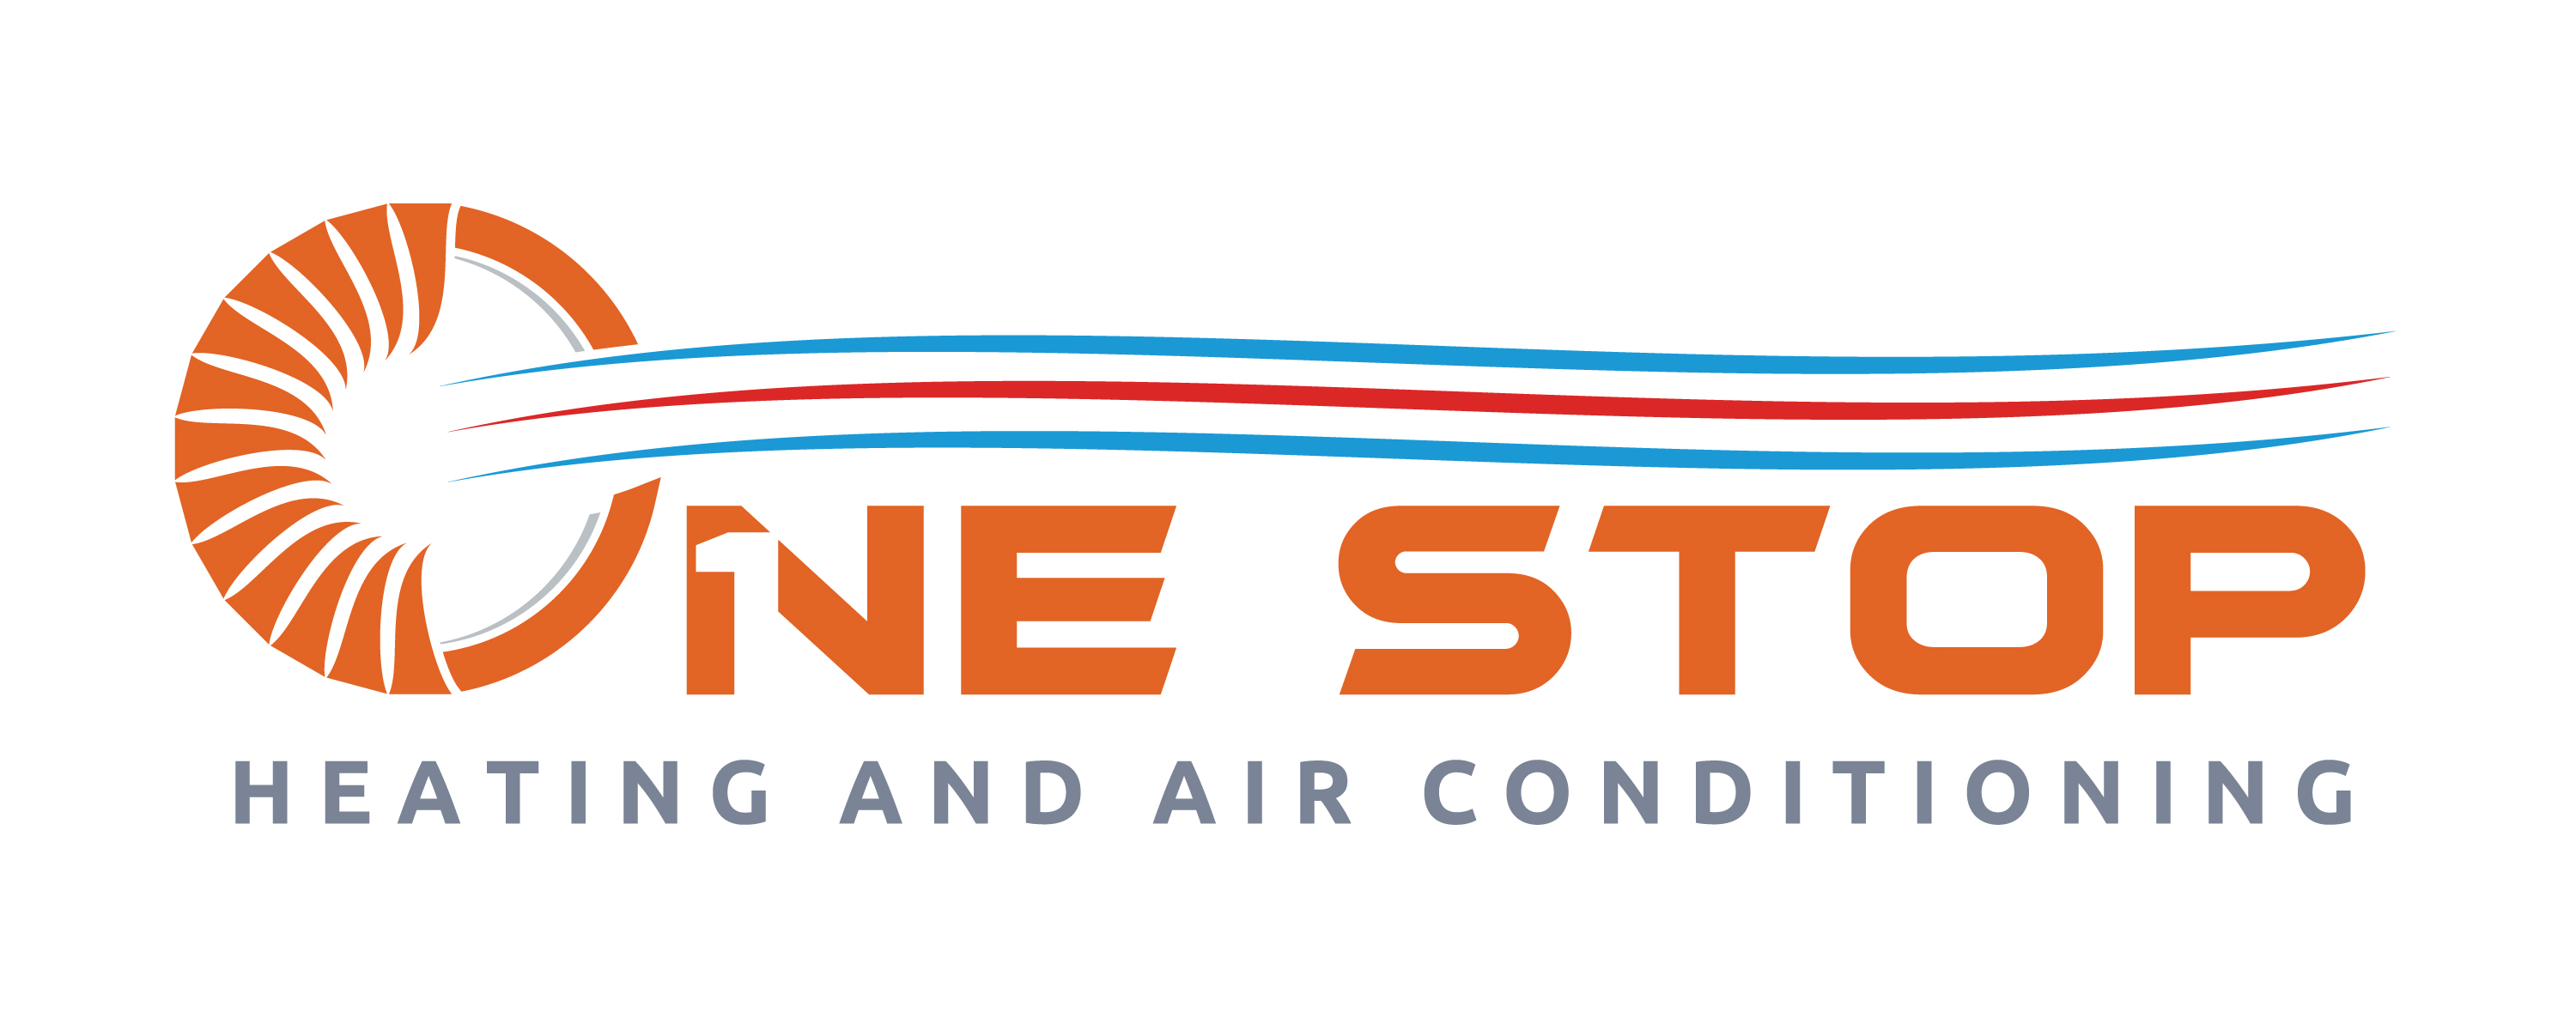 One Stop Heating and Air Conditioning, LLC Logo